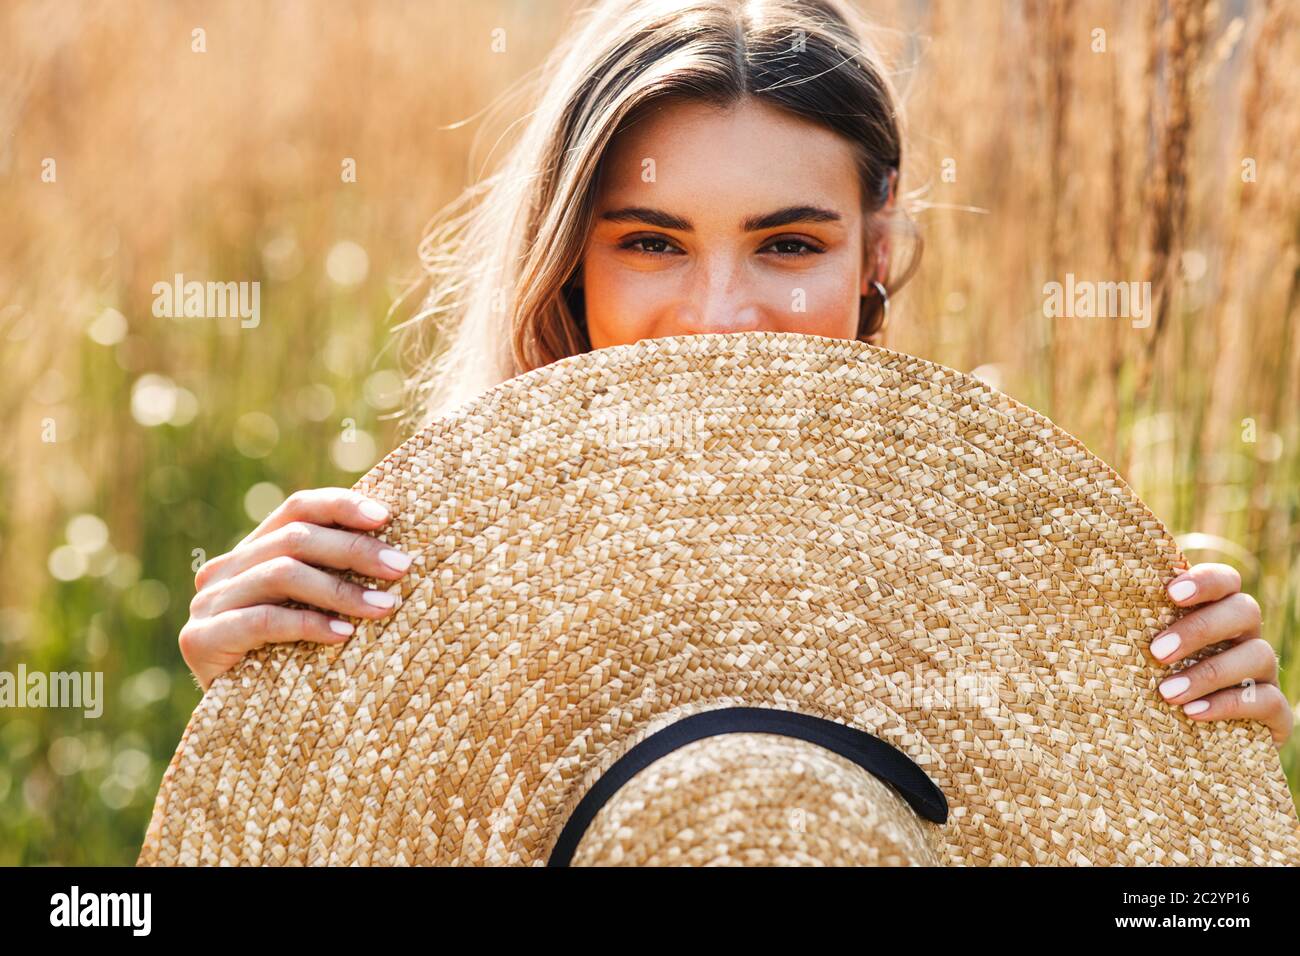 Portrait of beautiful woman peeking through a hat in hand while standing on a field Stock Photo